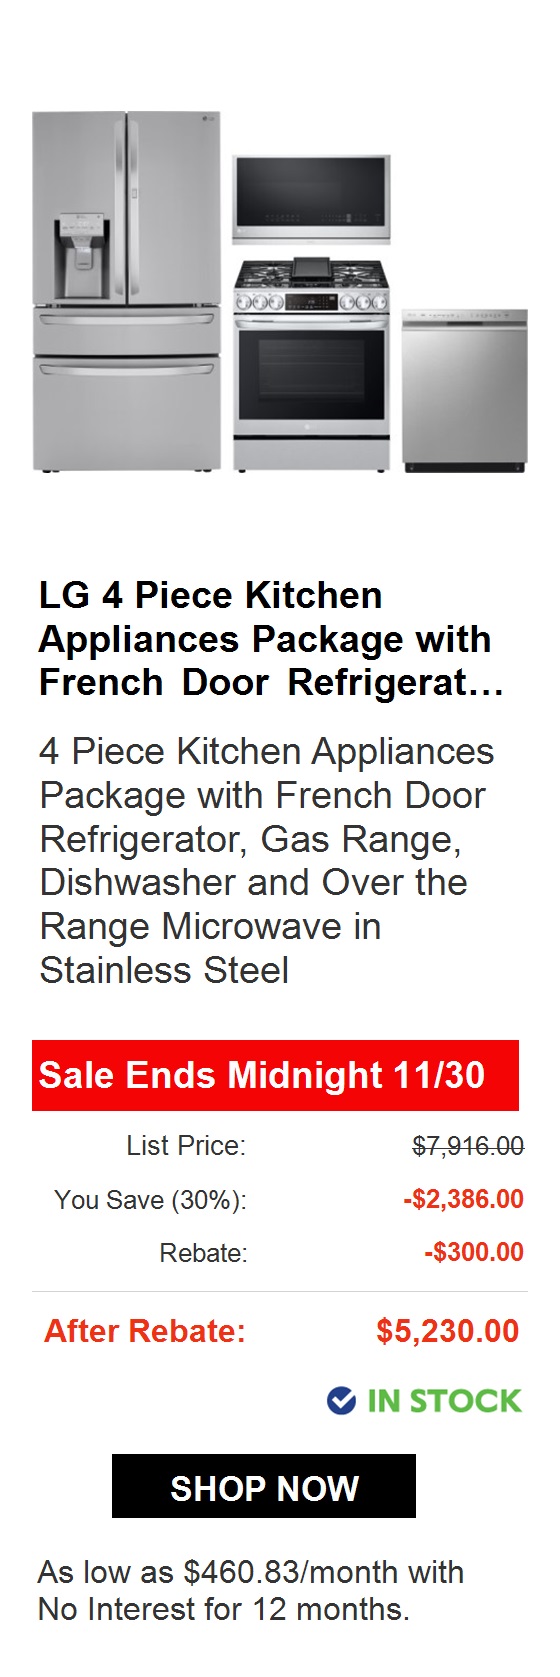  GE 4 Piece Kitchen Appliances Package with French Door Refrigerat... 4 Piece Kitchen Appliances Package with French Door Refrigerator, Electric Range, Dishwasher and Over the Range Microwave in Stainless Steel Sale Ends Midnight 1130 List Price: $4,715.00 You Save 29%: -$1,377.00 Total: $3,338.00 Deal Ends Soon! IN STOCK As low as $185.44month with No Interest for 18 months. 